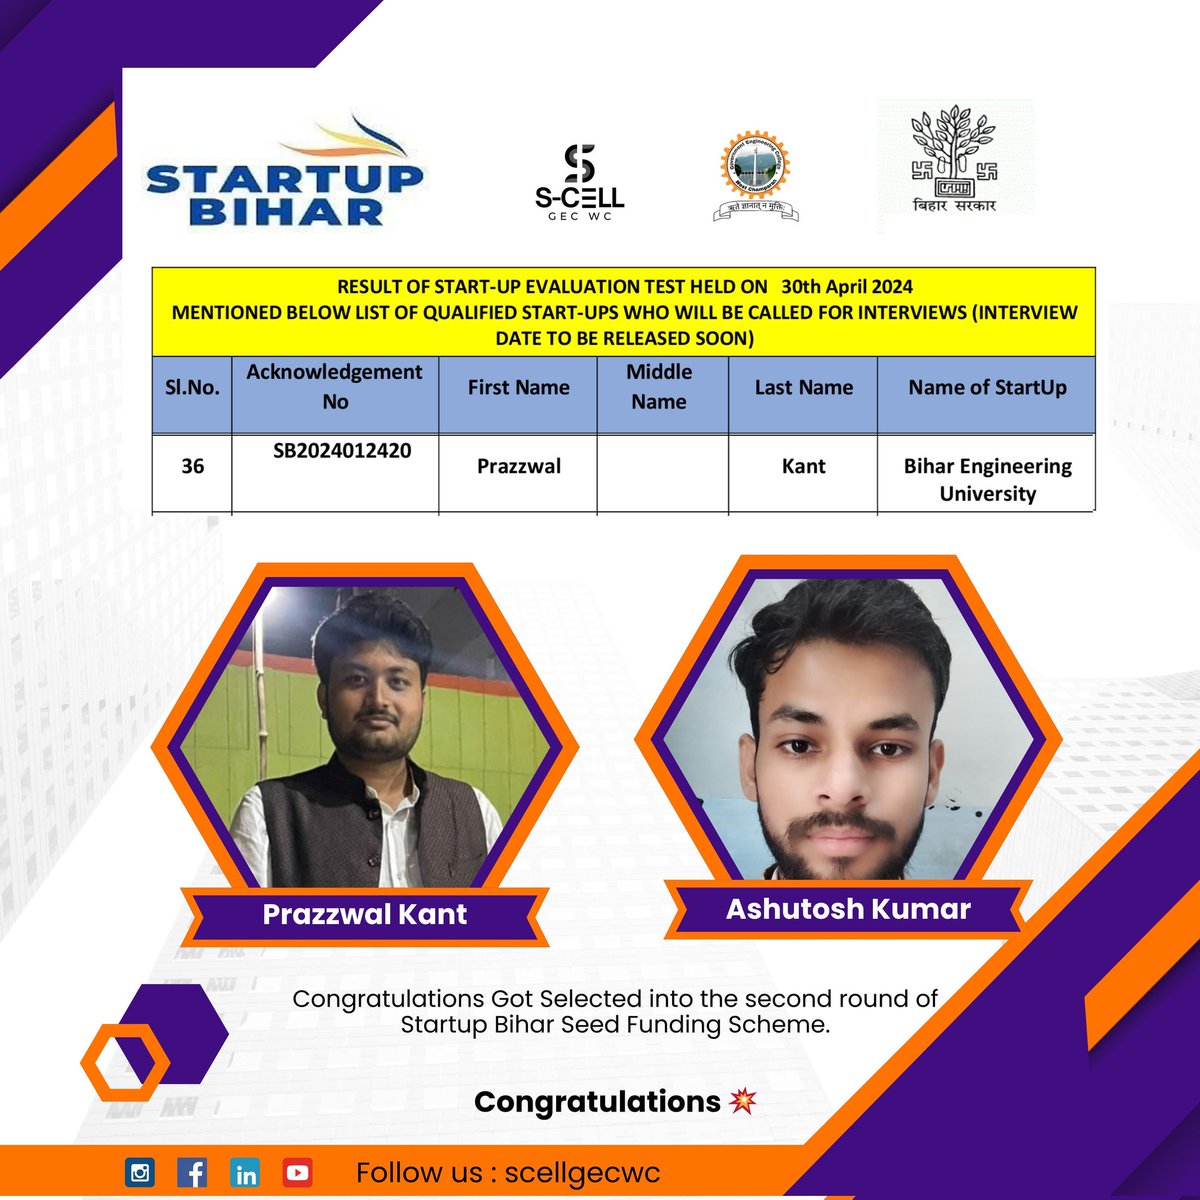 Congratulations🎉✌️
👉Prazzwal Kant
👉Ashutosh Kumar
👉*Selected into the second round of Startup Bihar!*
👉Now these students are only one step away from seed funding of rupees 10 Lakh!
#startup 
#scellgecwc
#startupbihar 
#startupindia